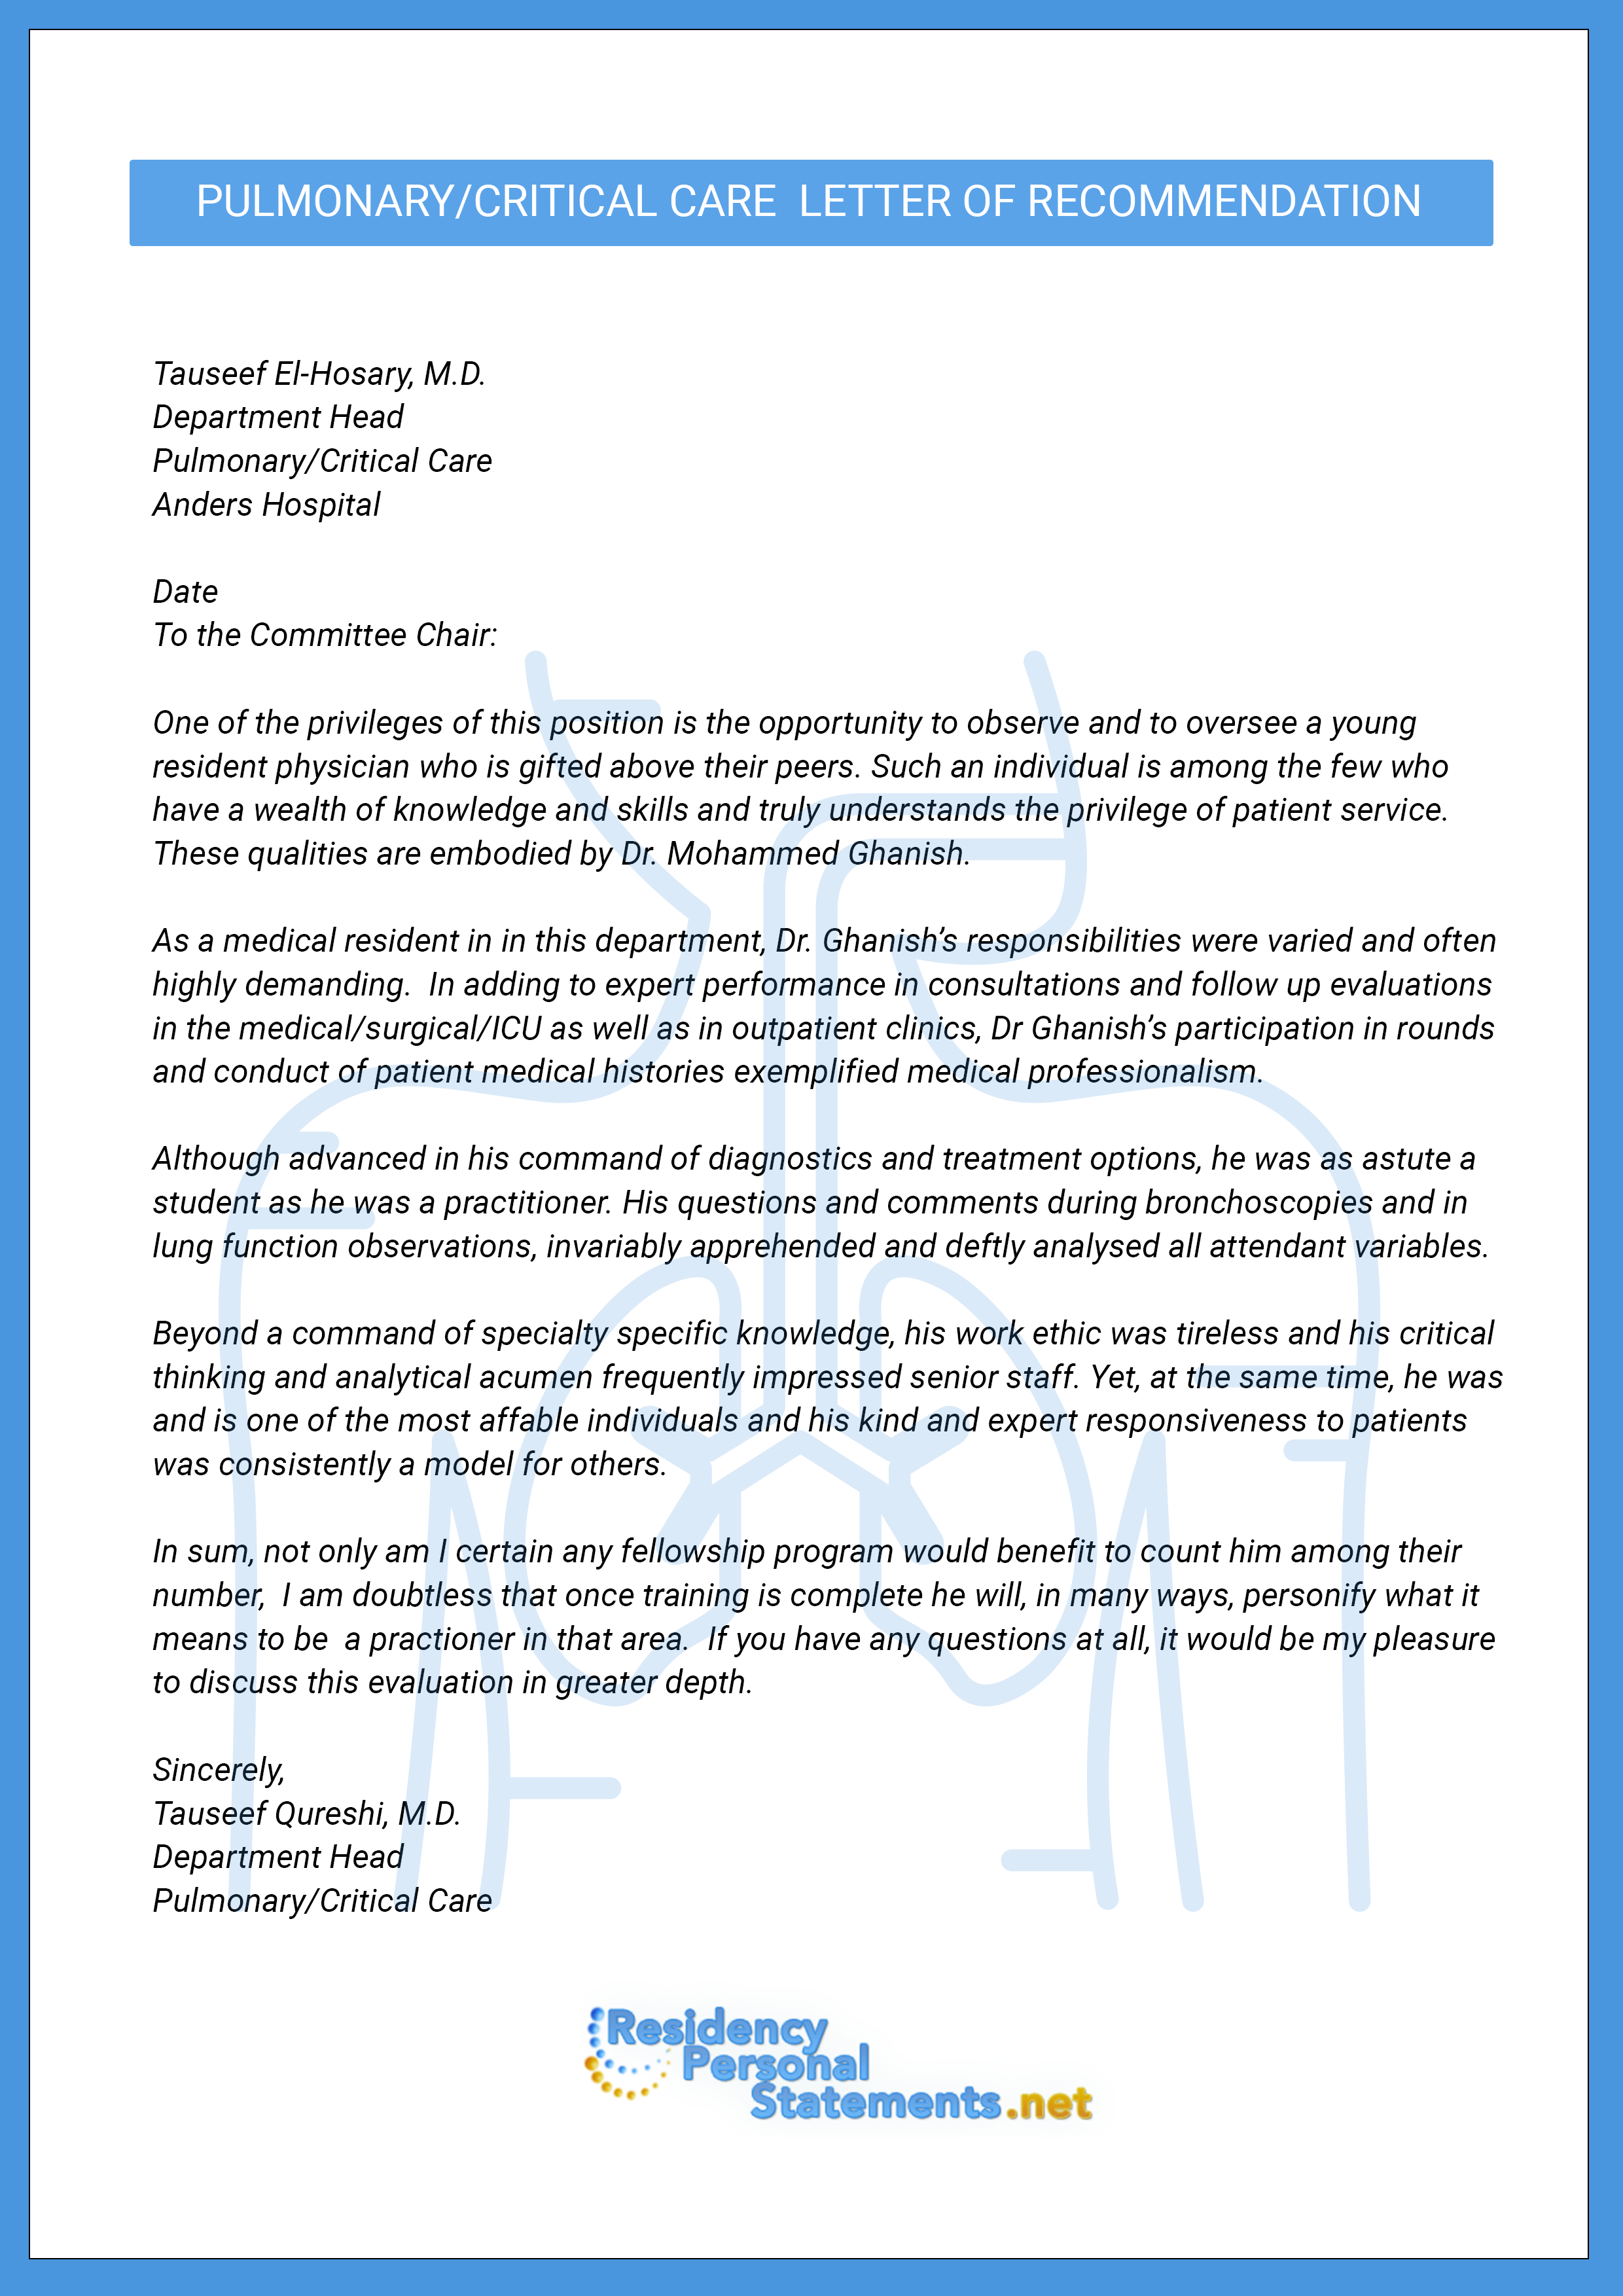 Letter Of Recommendation Personal from residencypersonalstatements.net